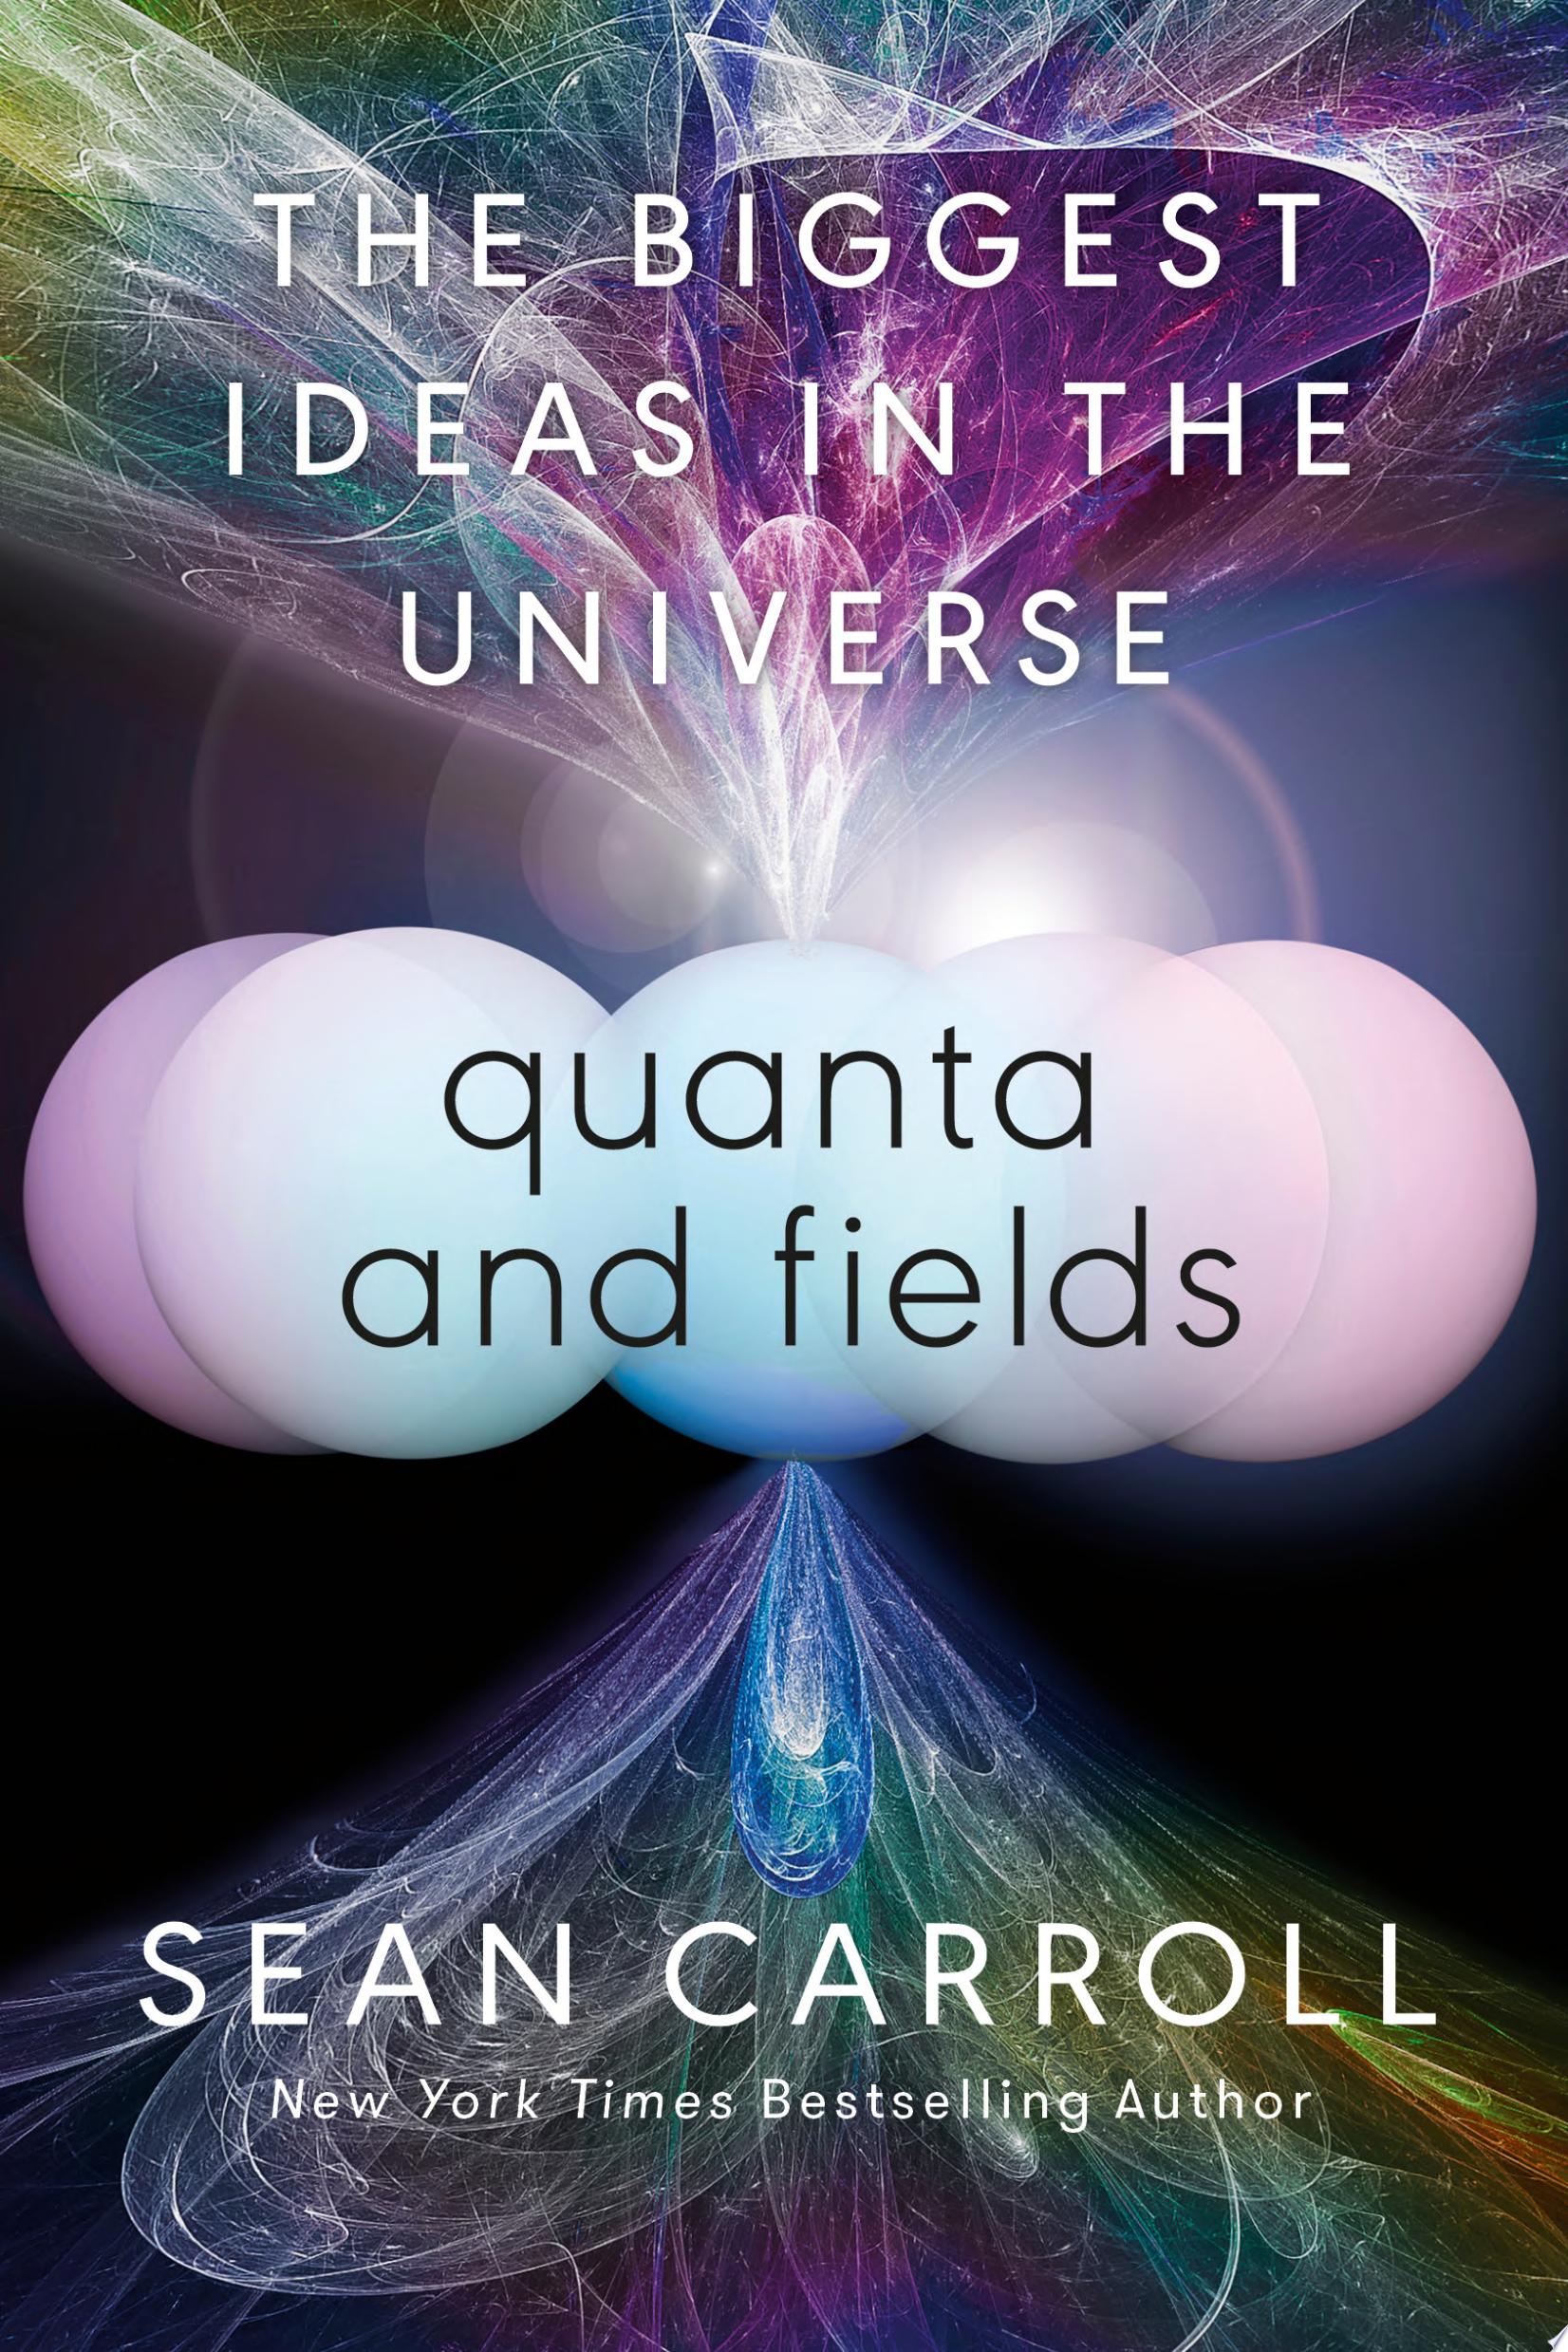 Image for "Quanta and Fields"